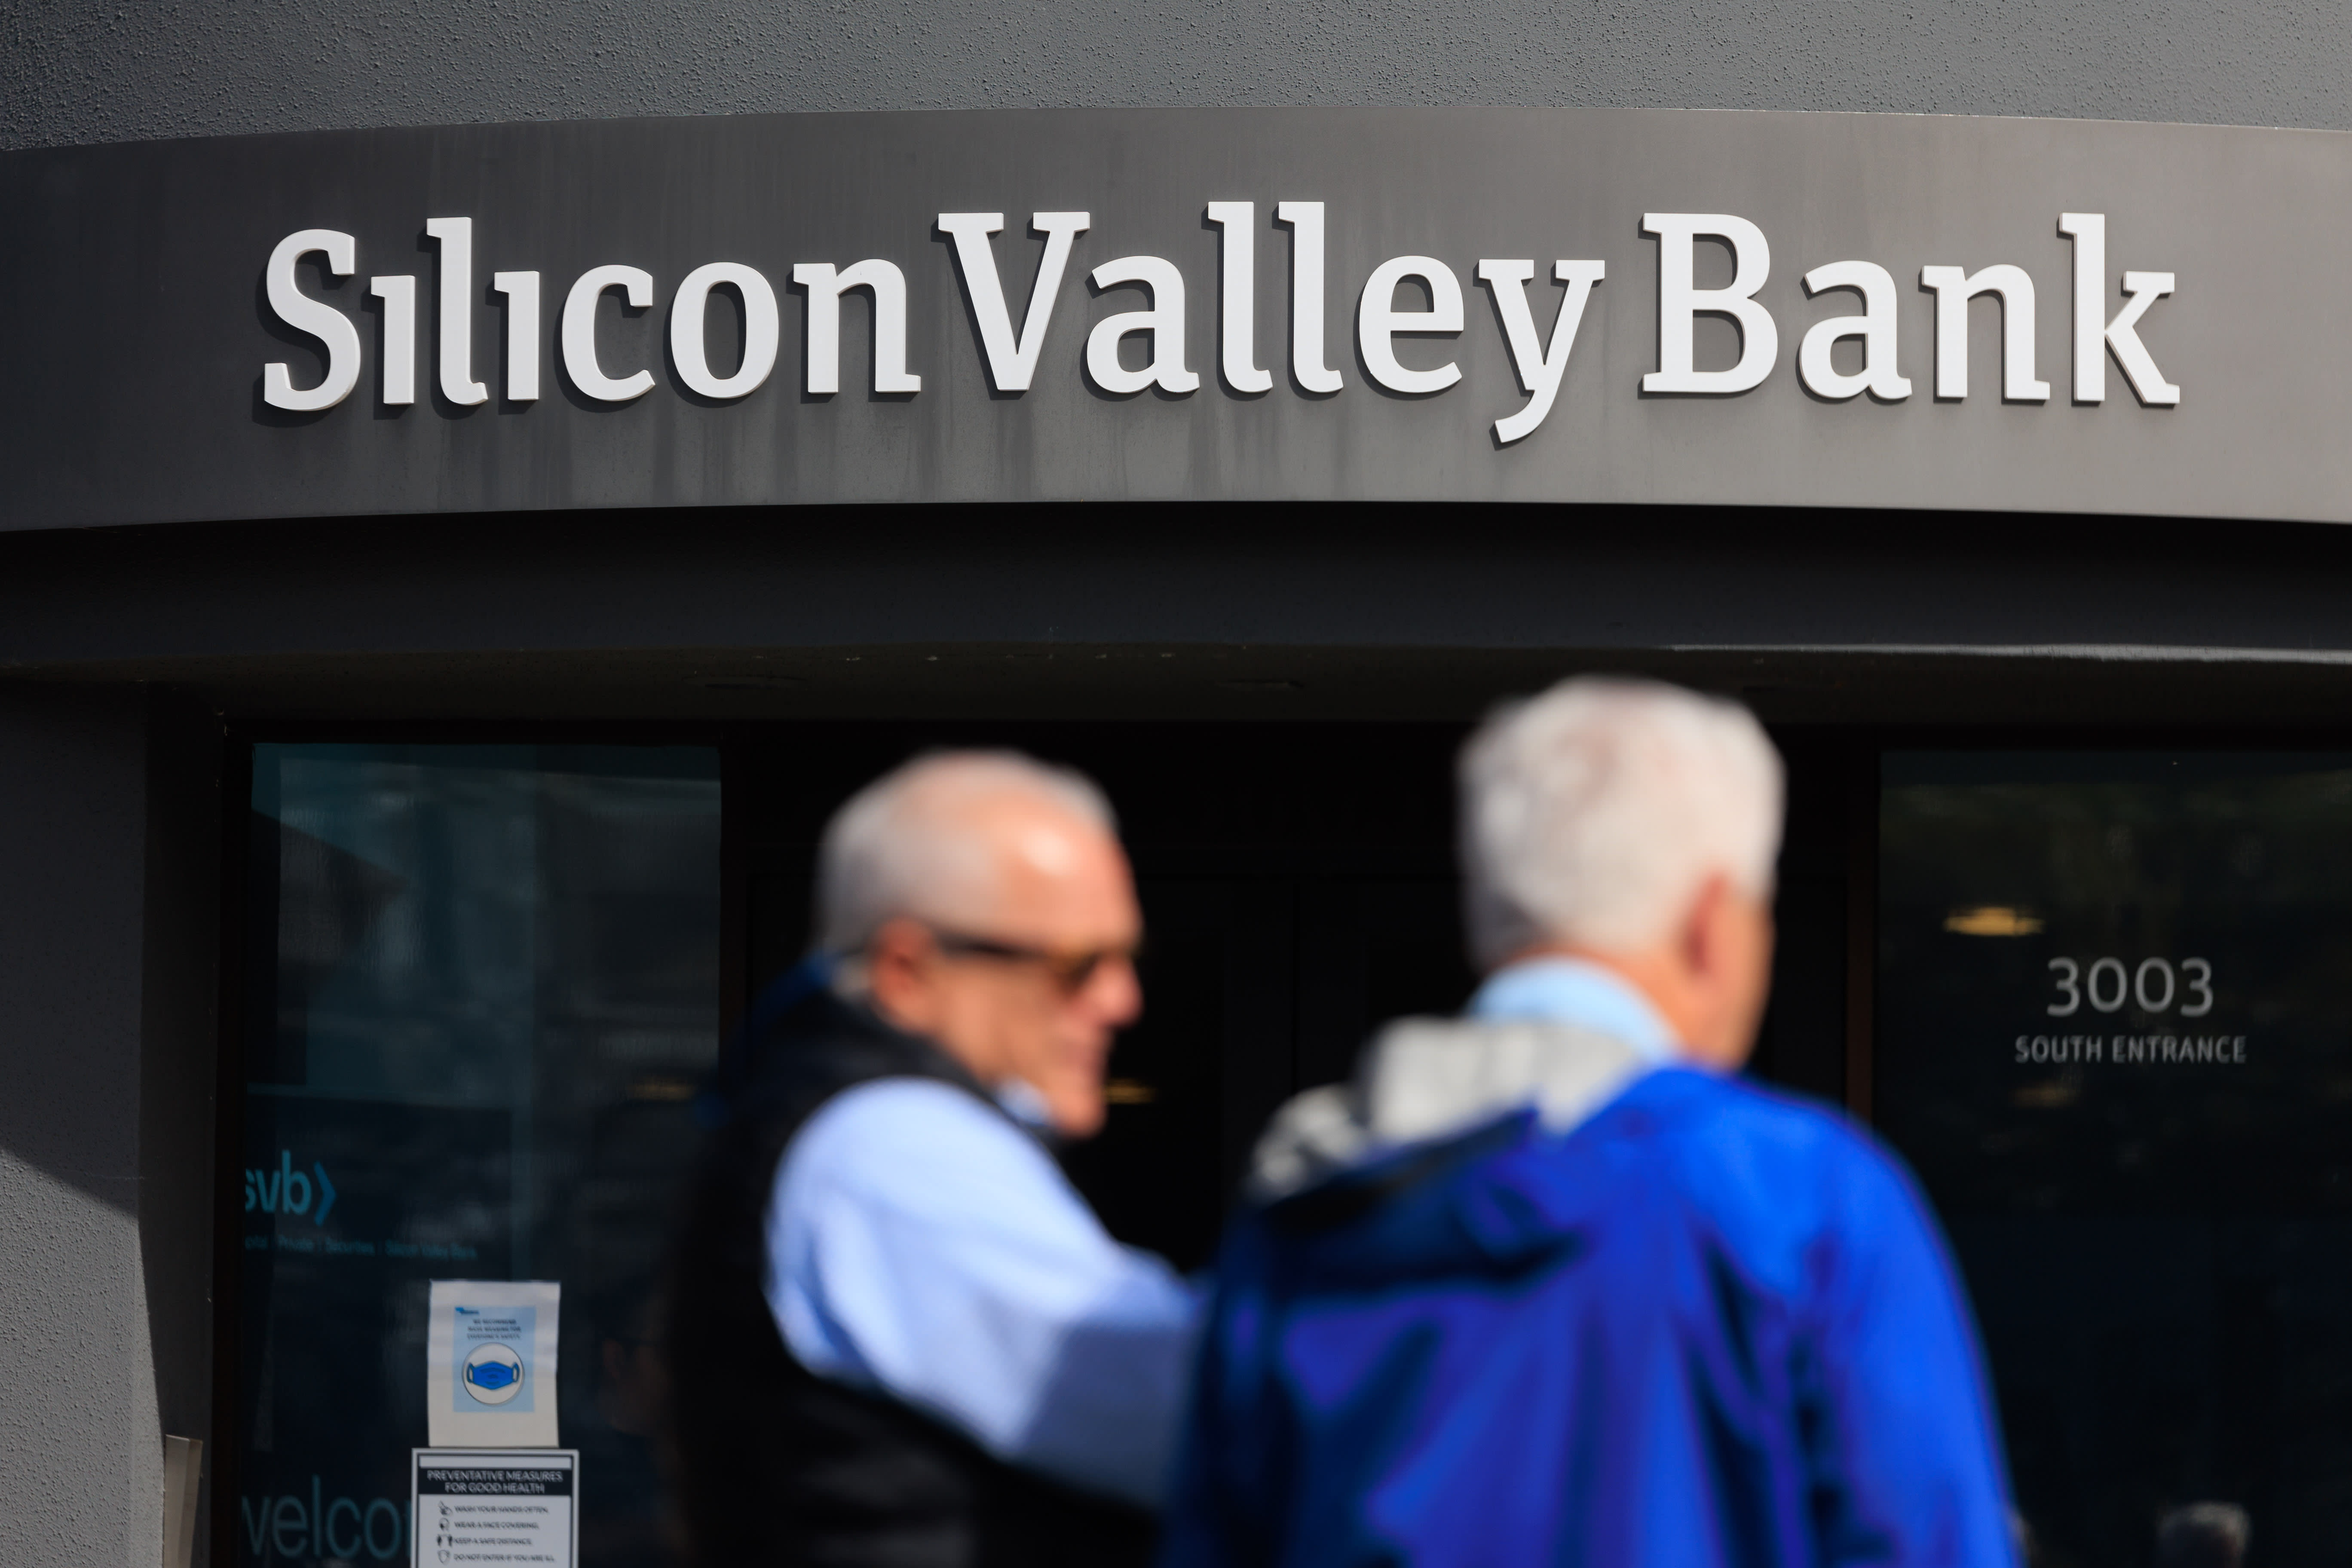 The private equity companies Apollo and KKR are among those considering loans from Silicon Valley Bank